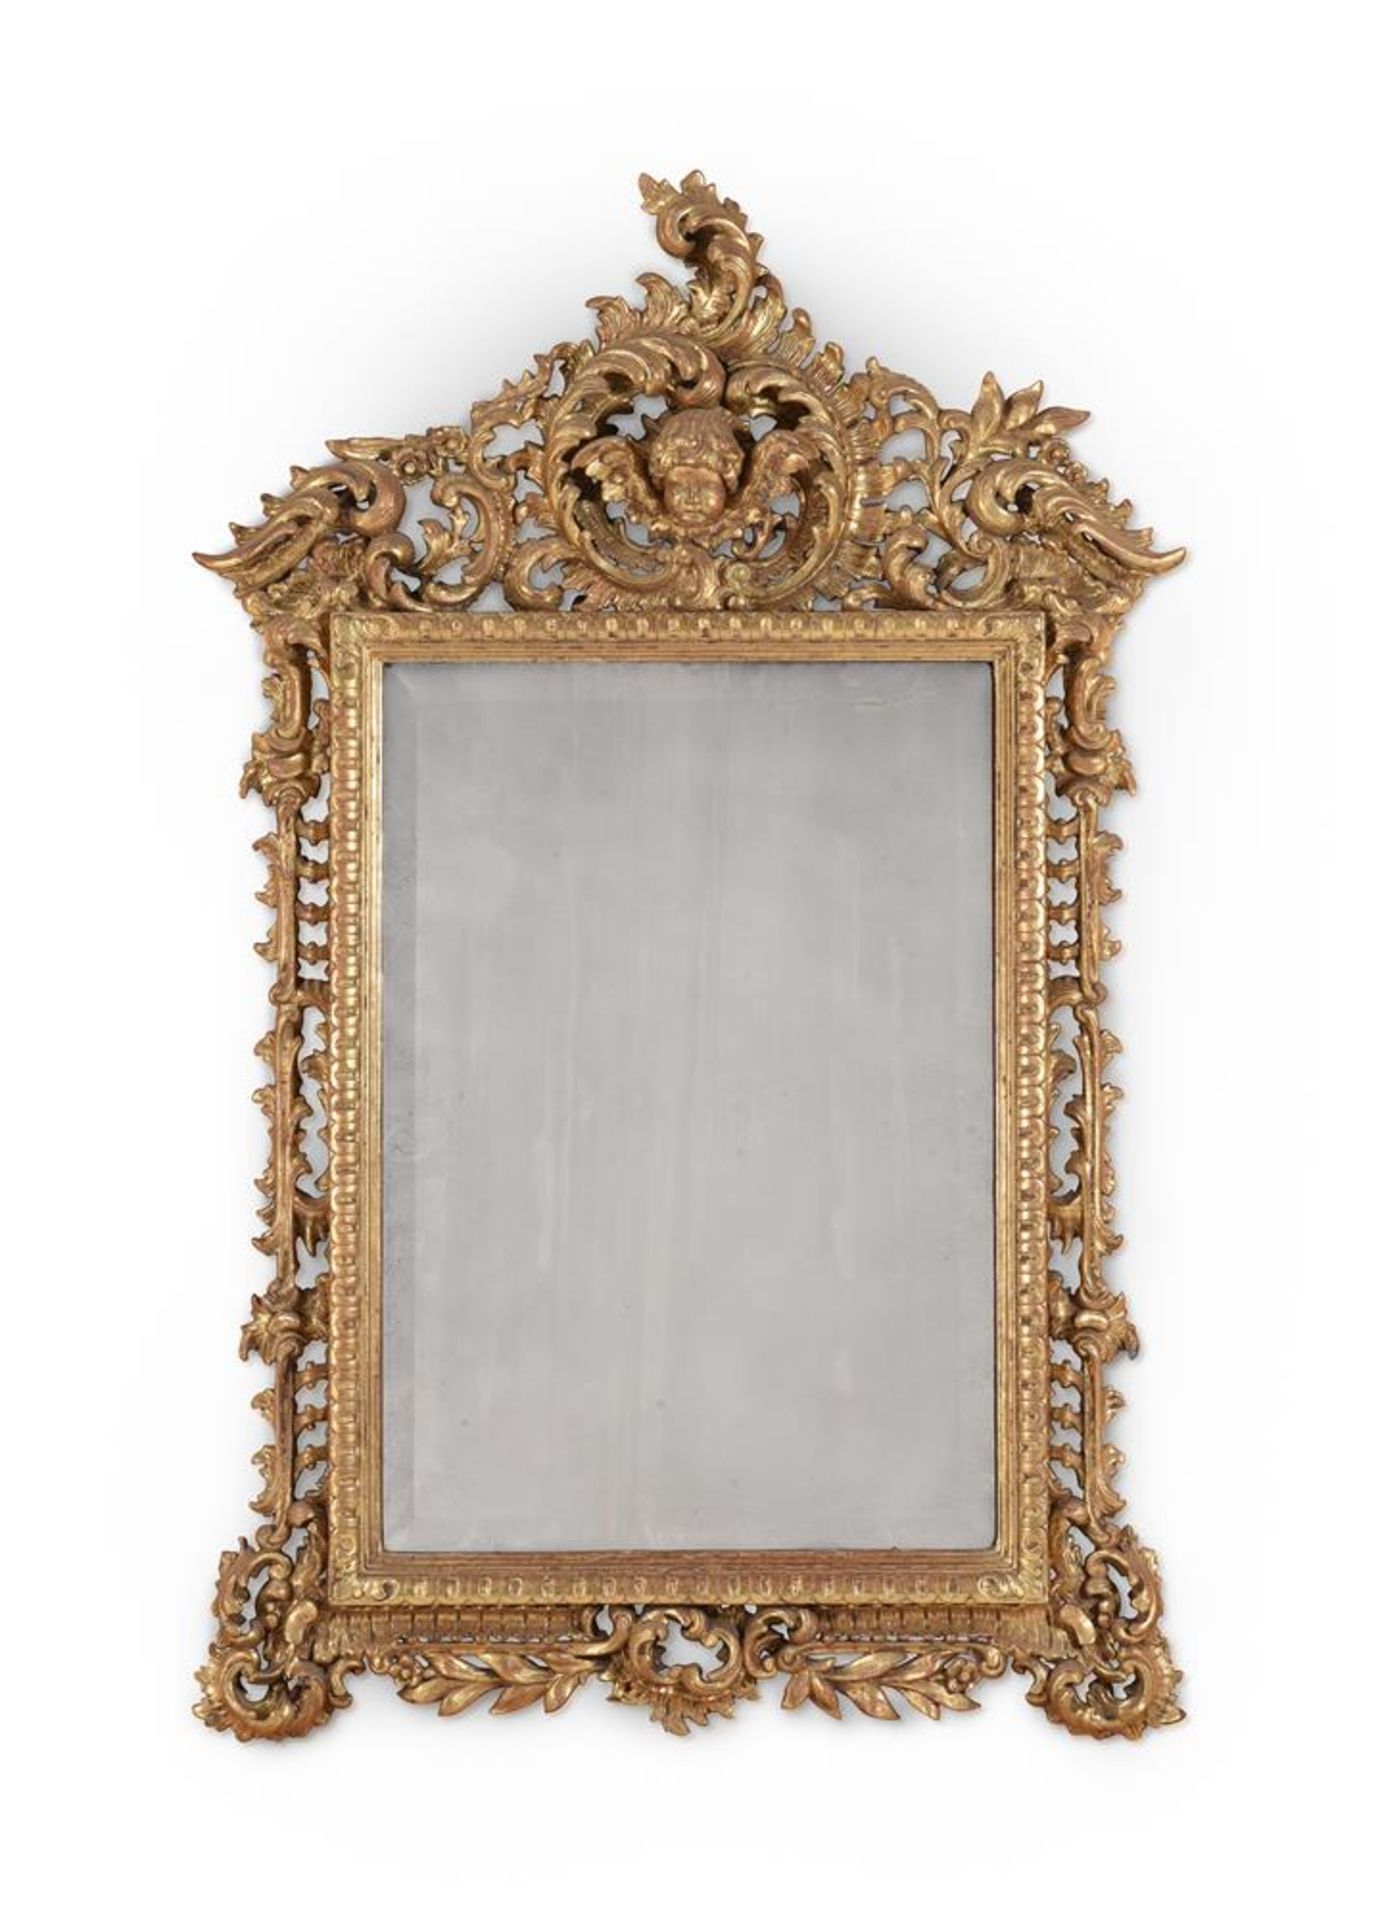 A CONTINENTAL CARVED GILTWOOD MIRROR, POSSIBLY ITALIAN, 19TH CENTURY